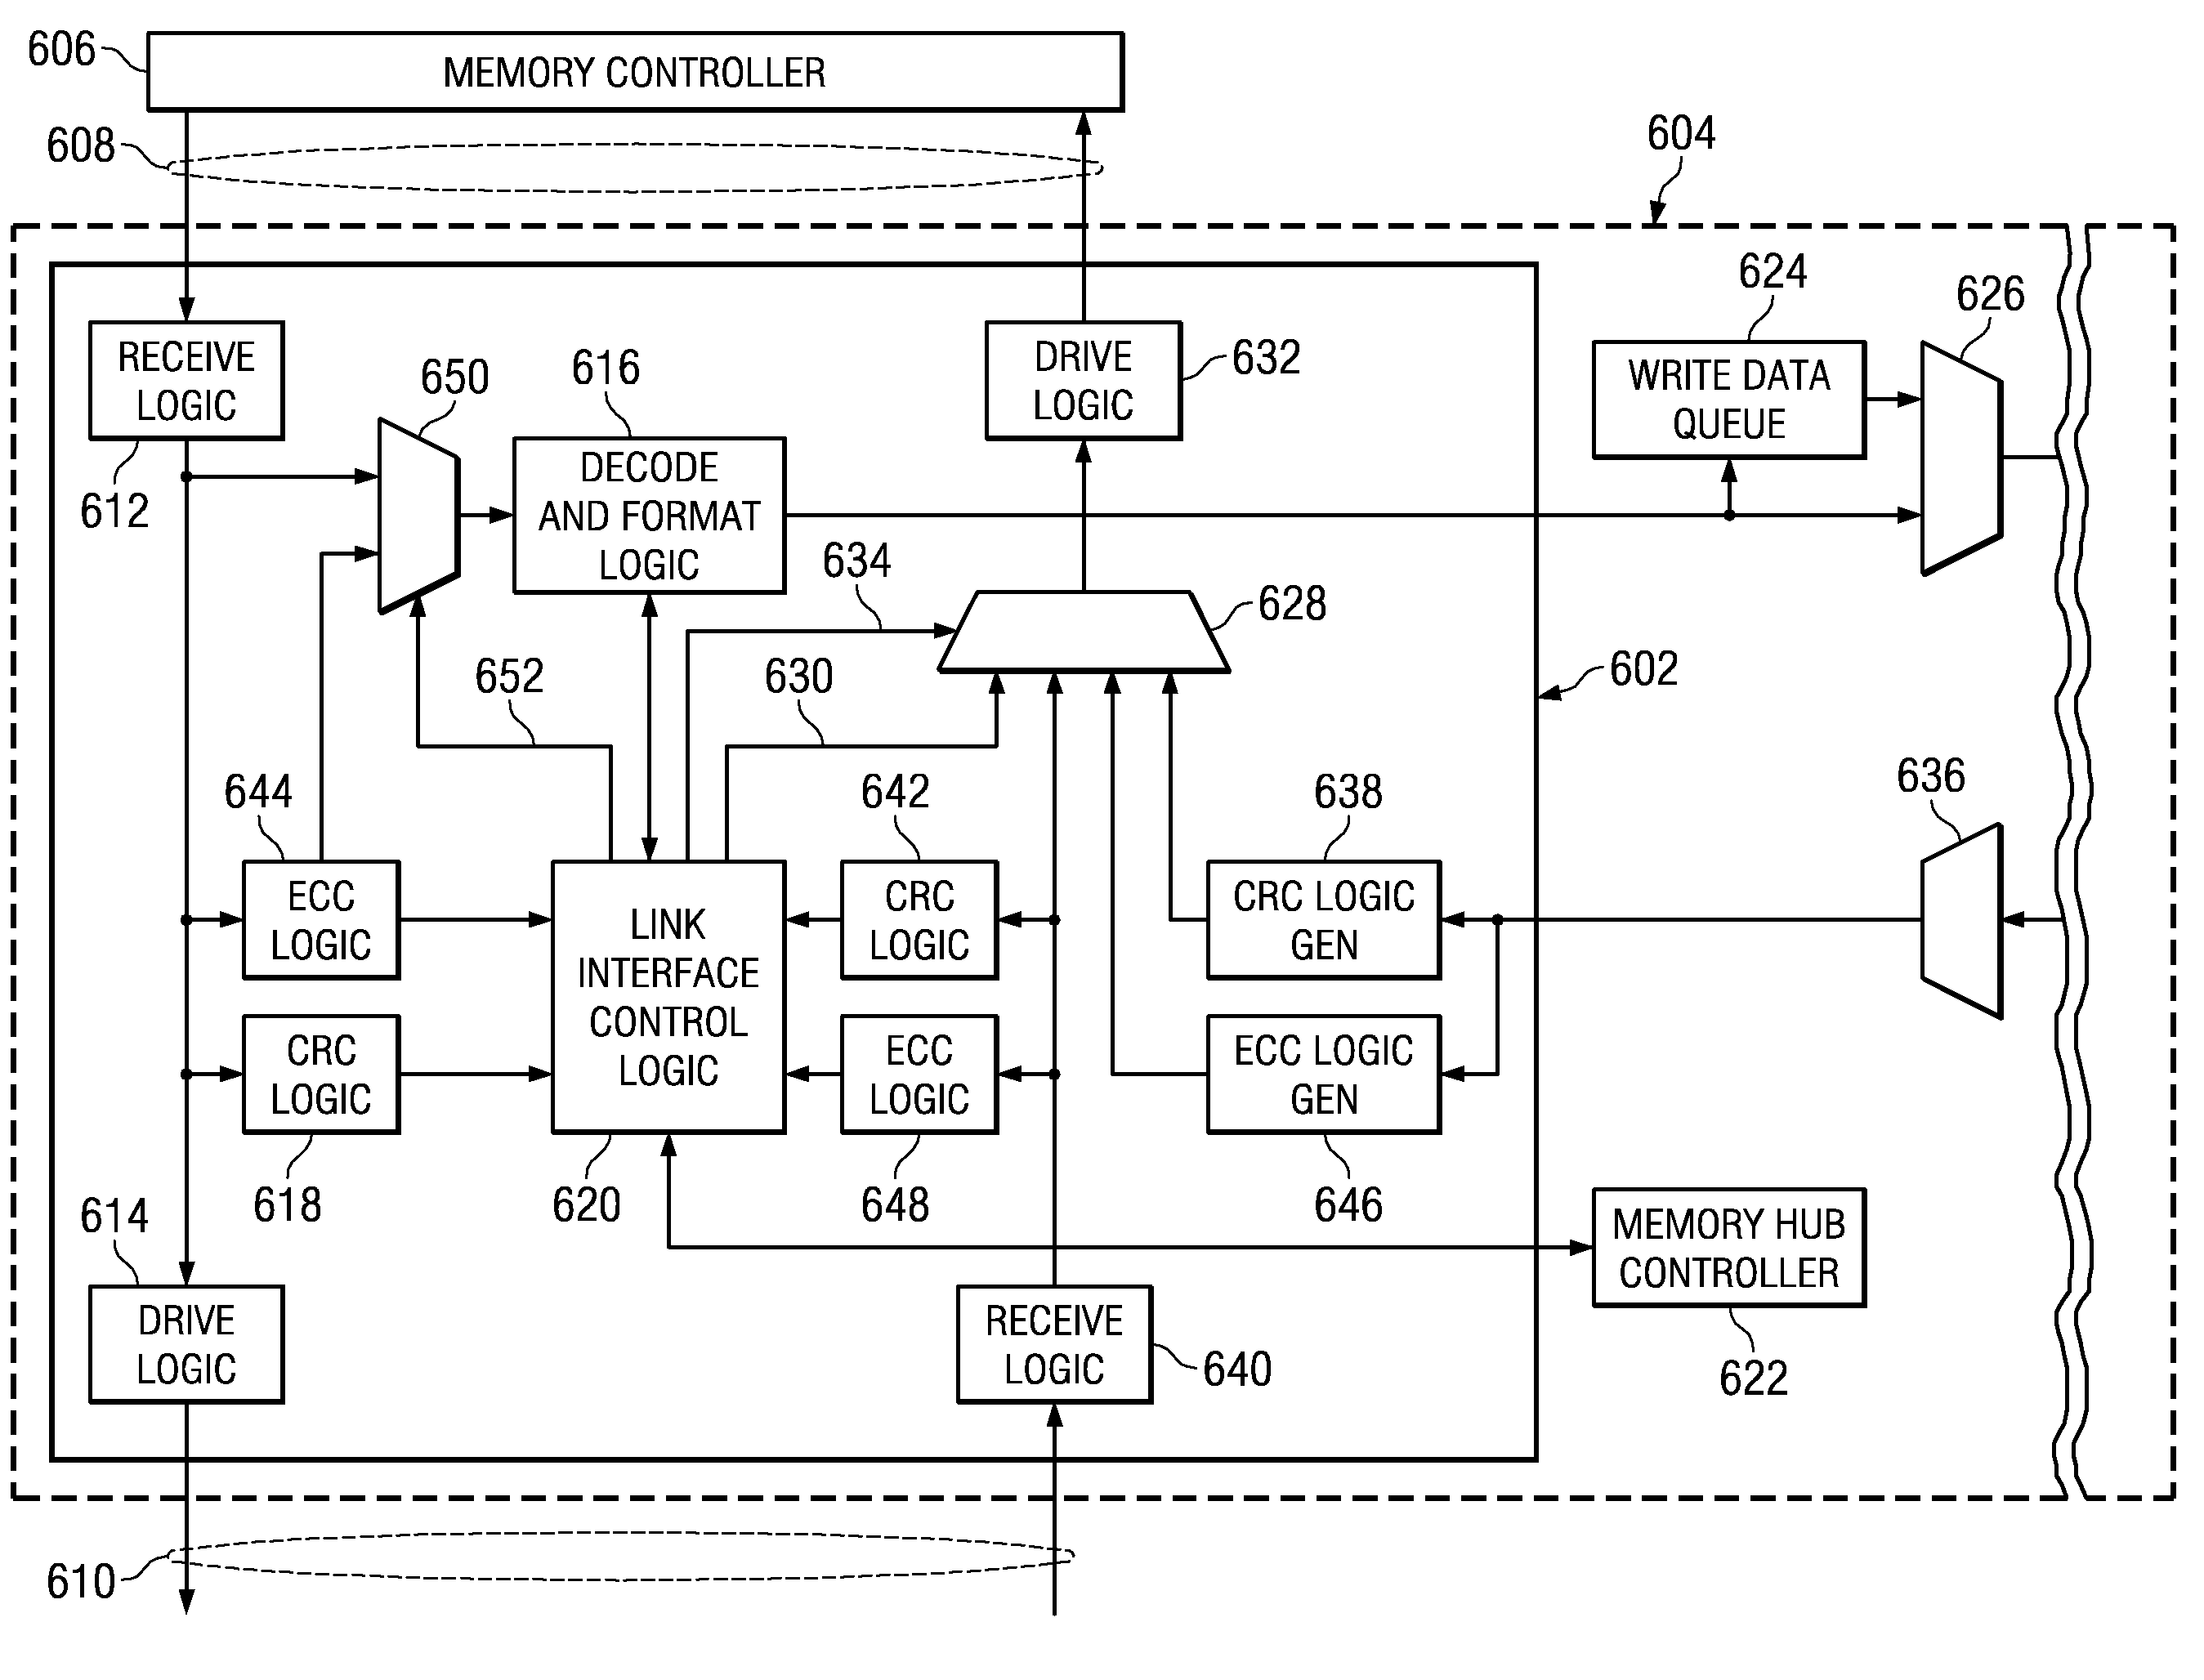 System for a combined error correction code and cyclic redundancy check code for a memory channel